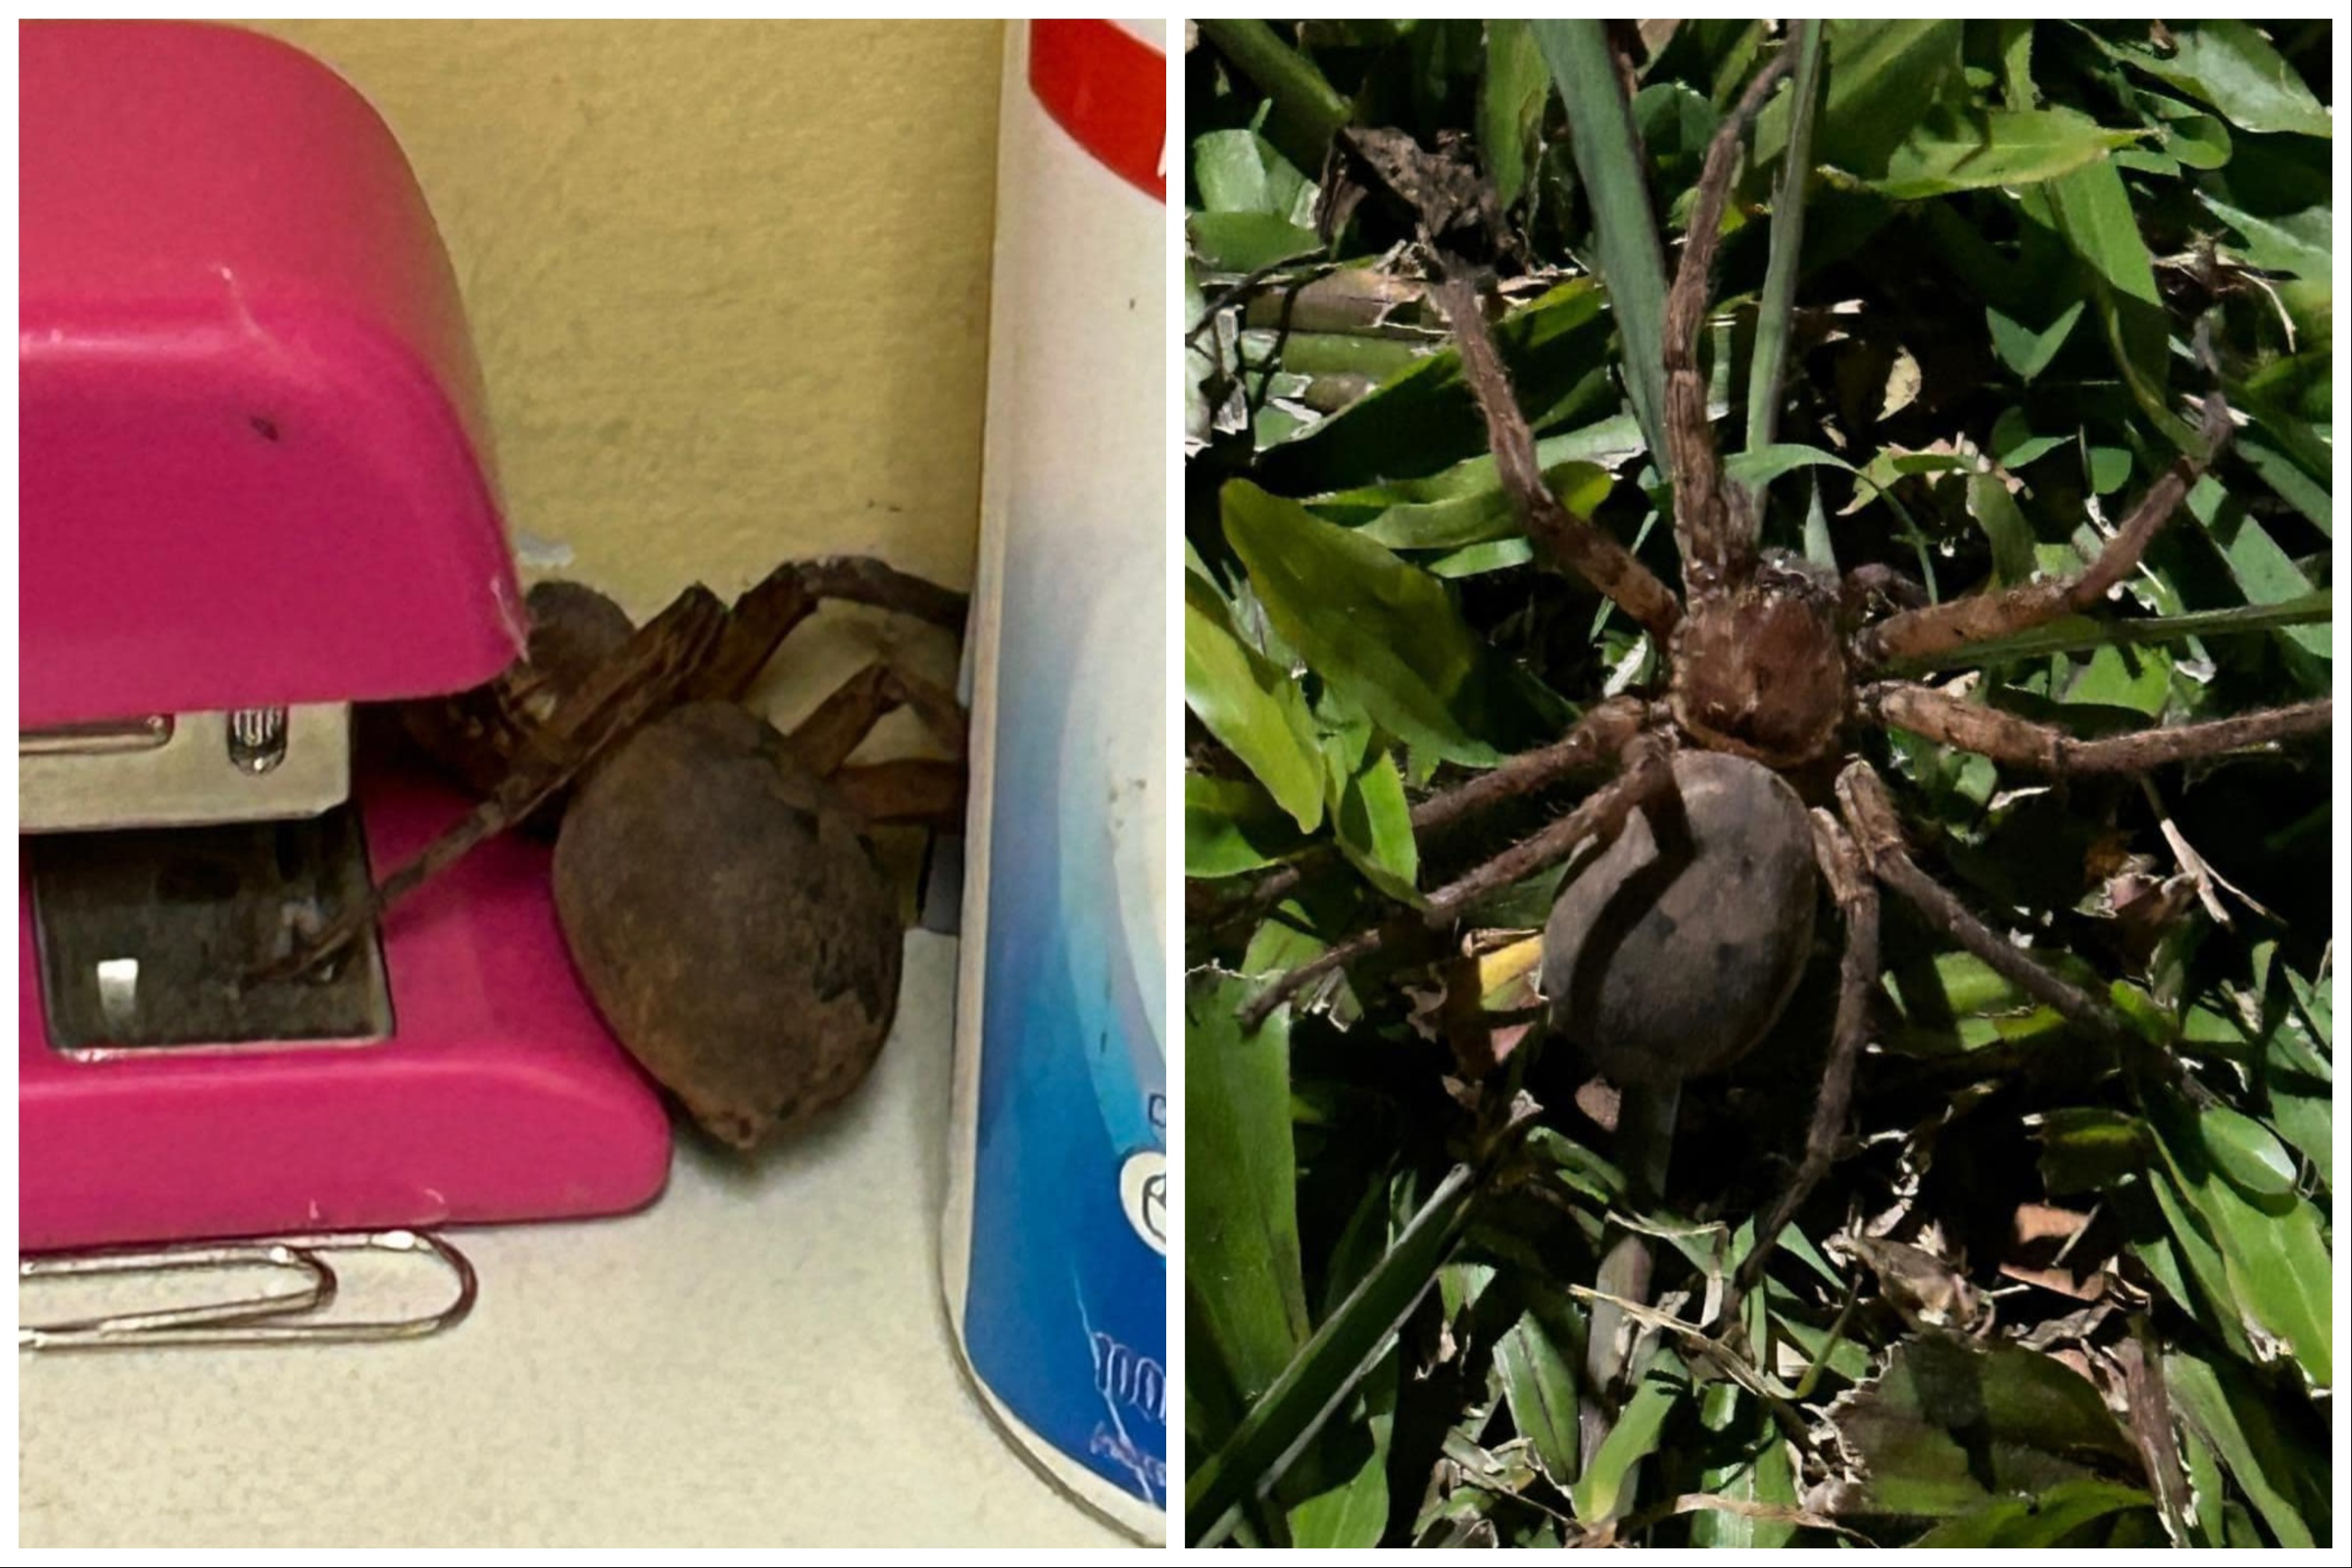 giant spider eating a snake is absolutely horrifying